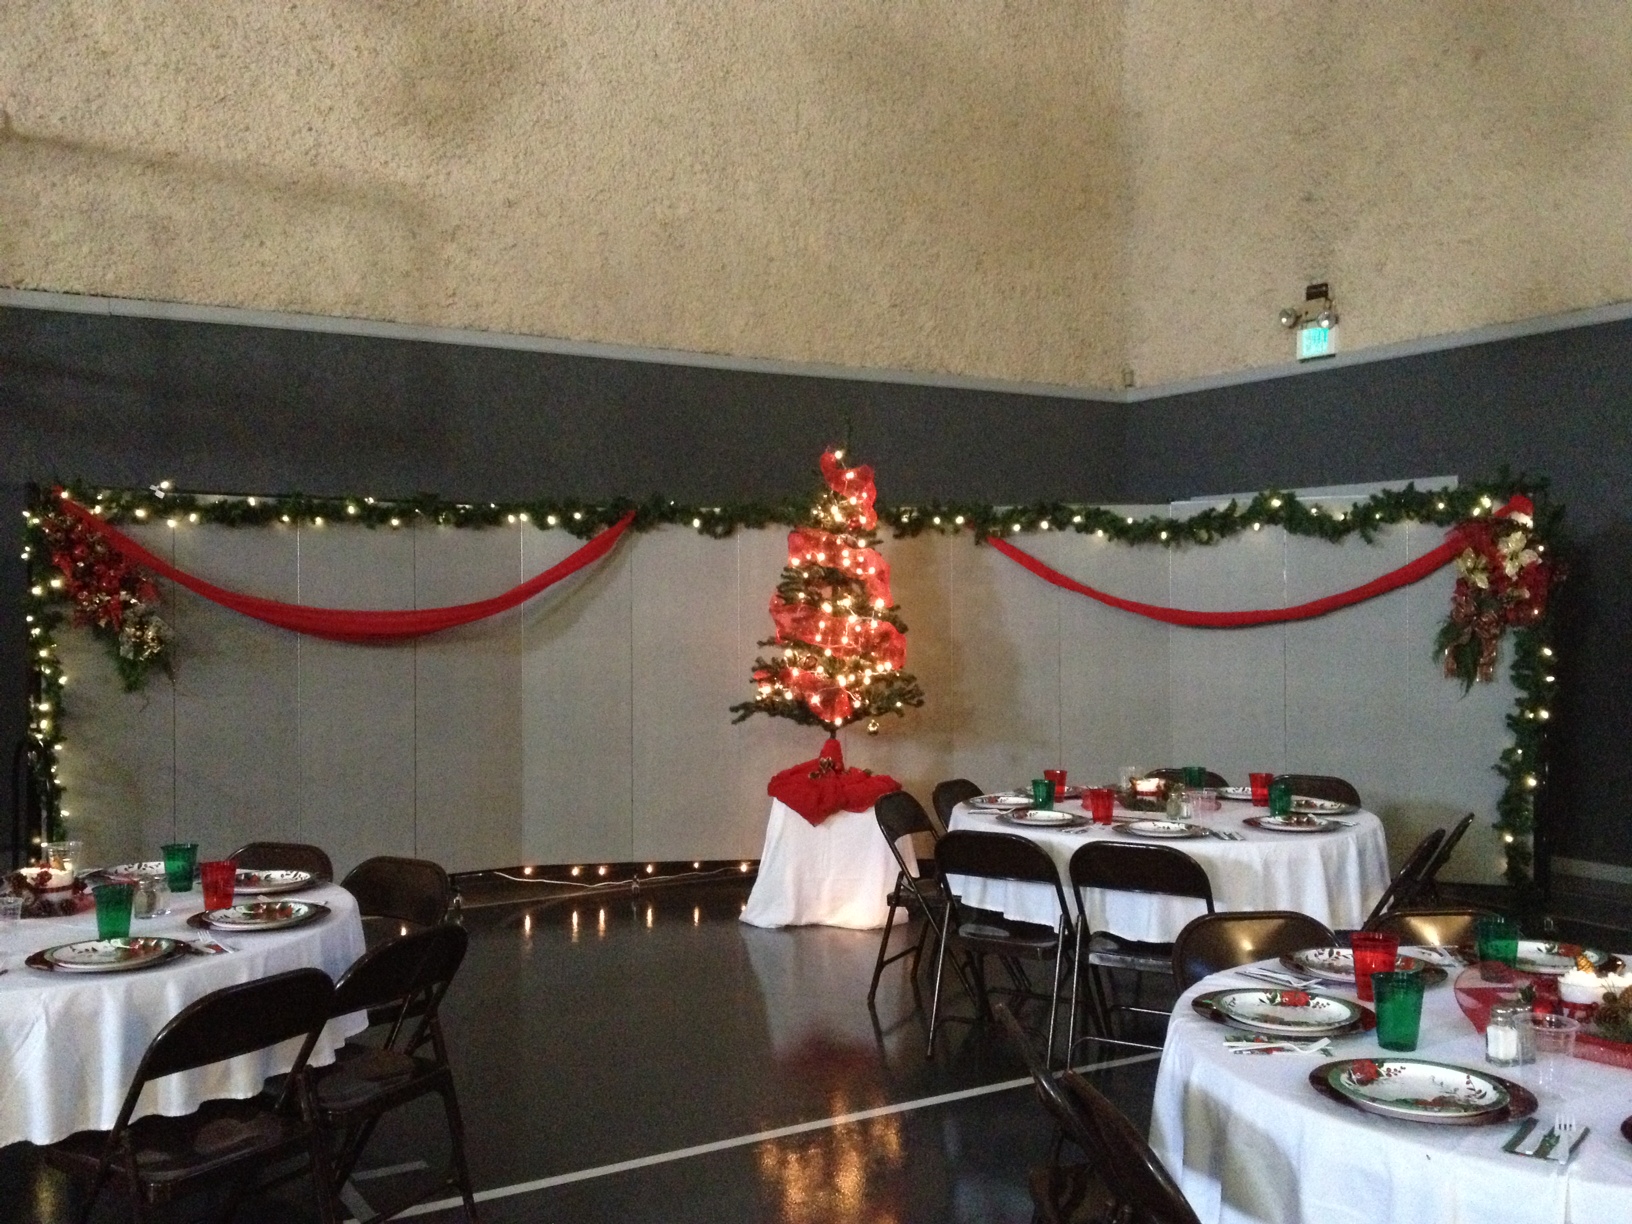 Decorated church gym for a women's Christmas banquet